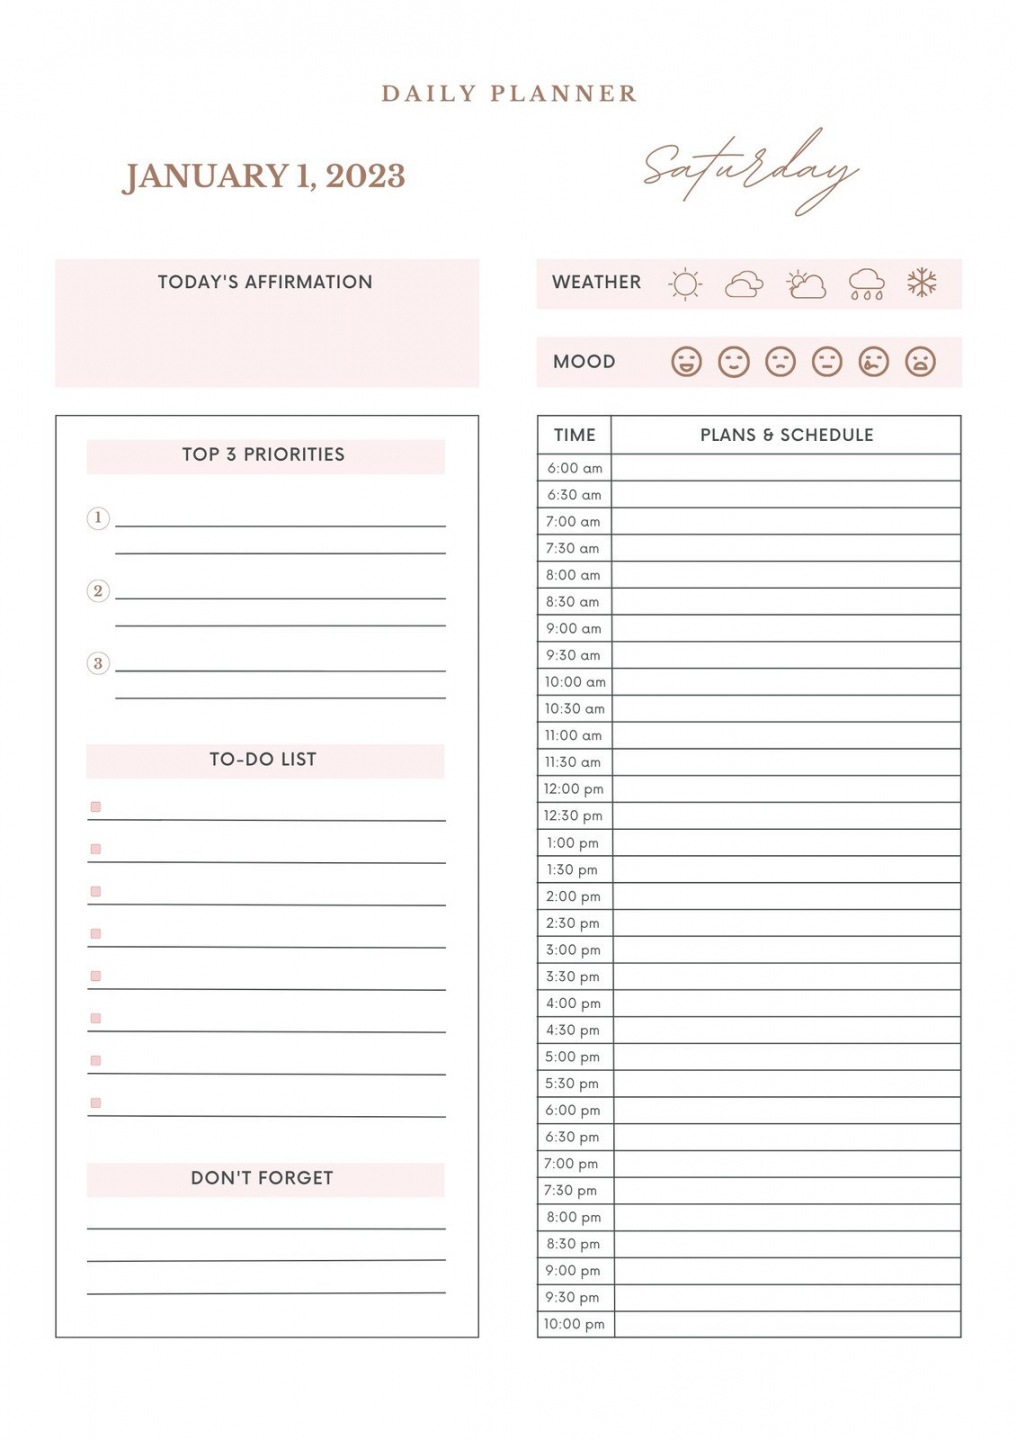 Free Printable Daily Planner - Printable - Free daily planner templates to customize  Canva